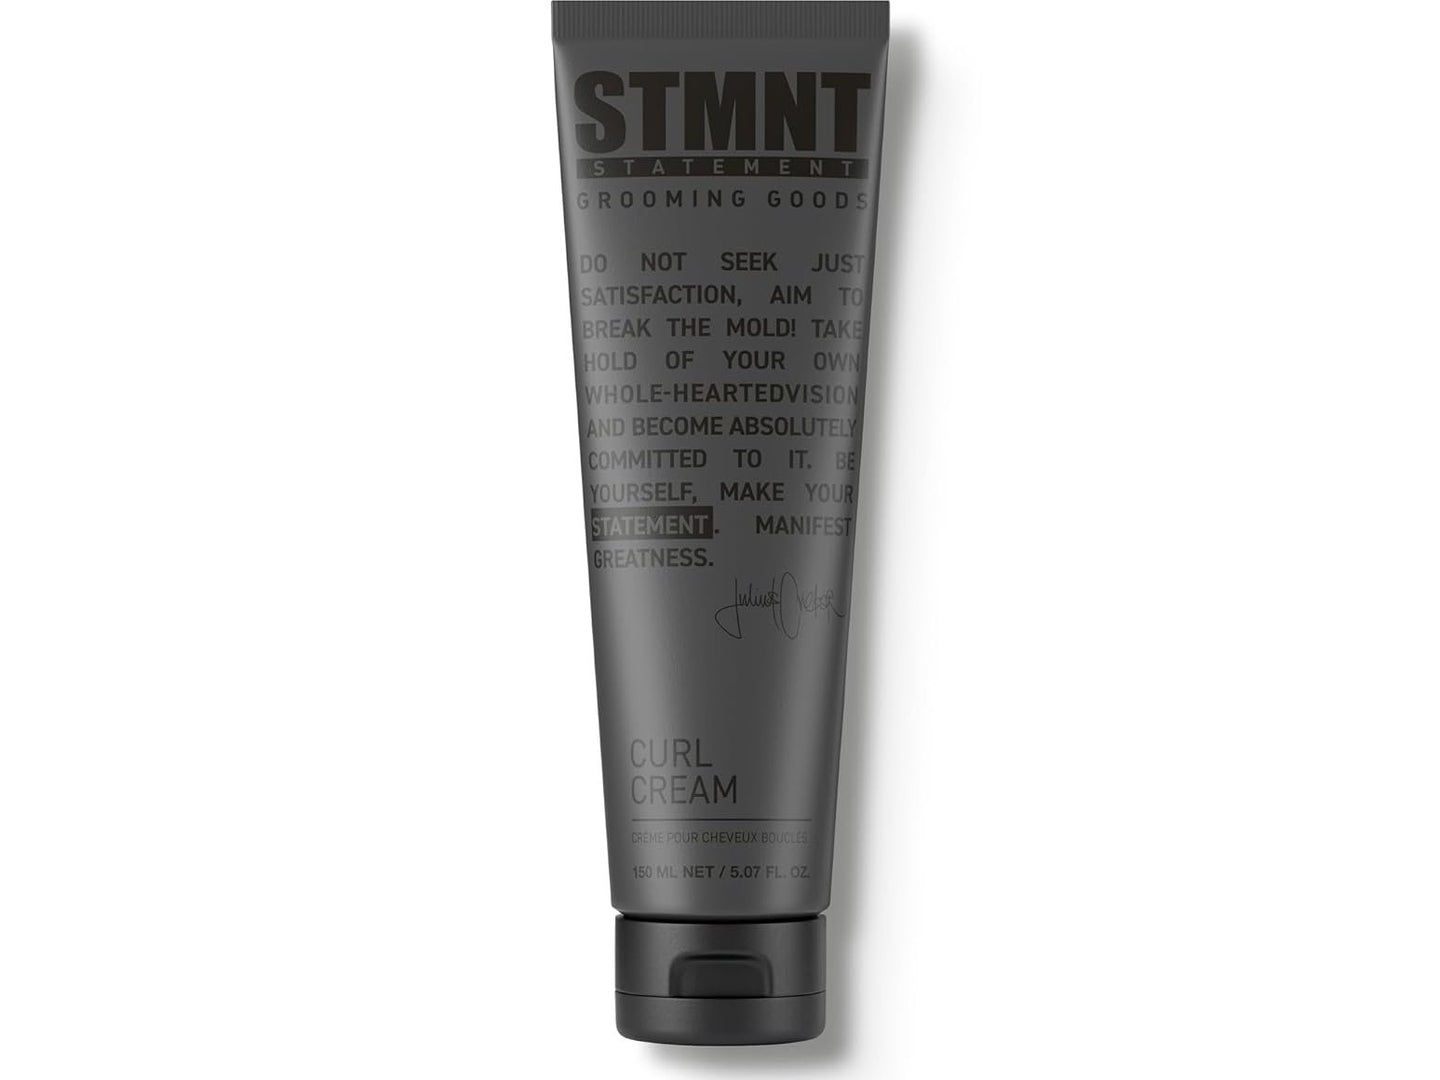 Save 15% on STMNT Curl Cream This Month!